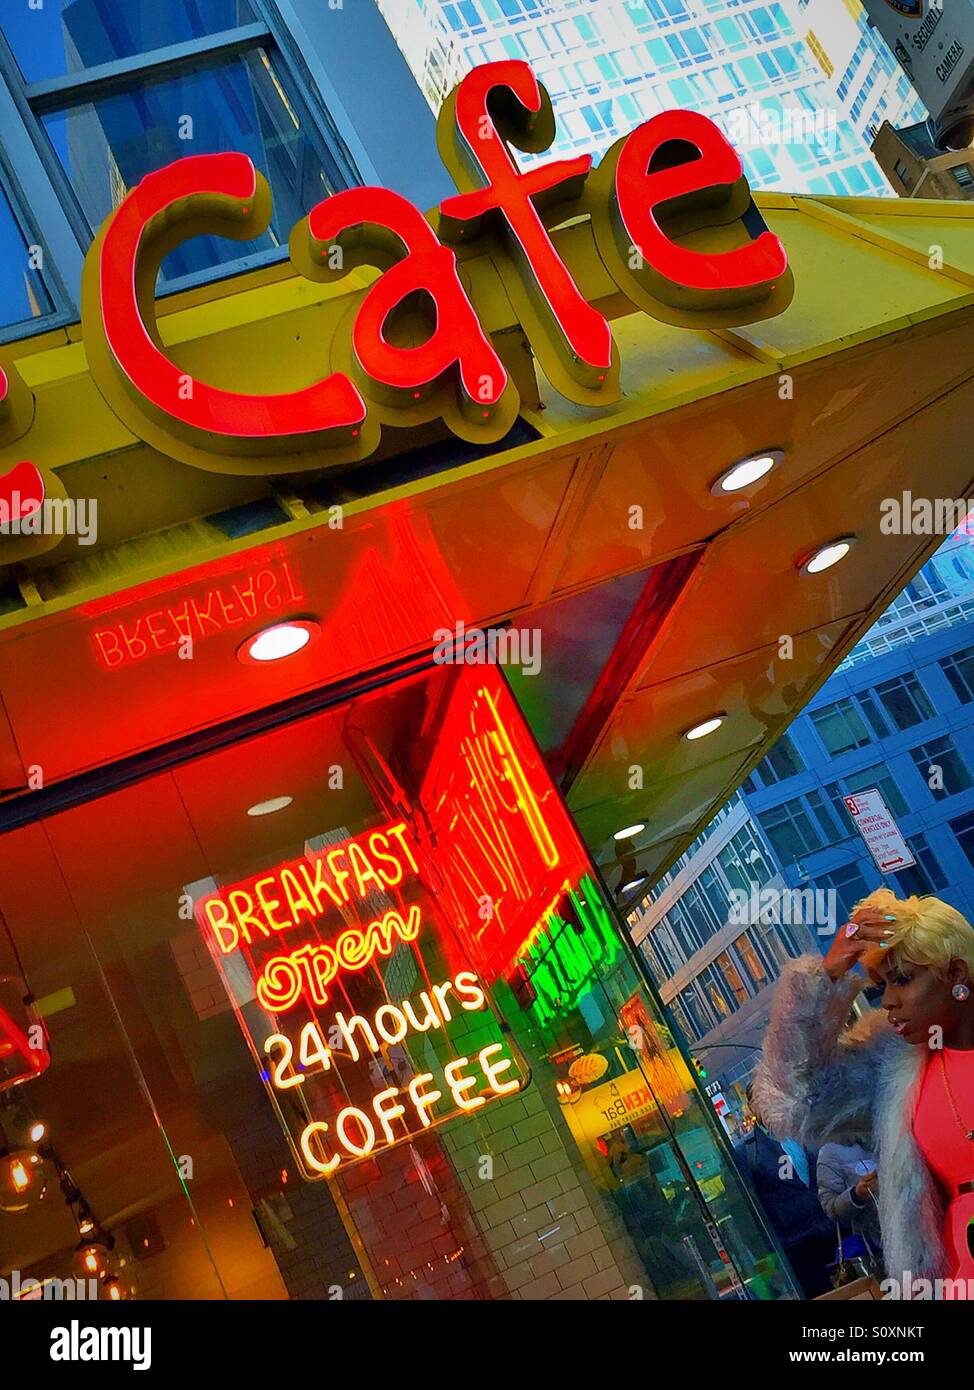 Cafe on a corner in Times Square, NYC Stock Photo